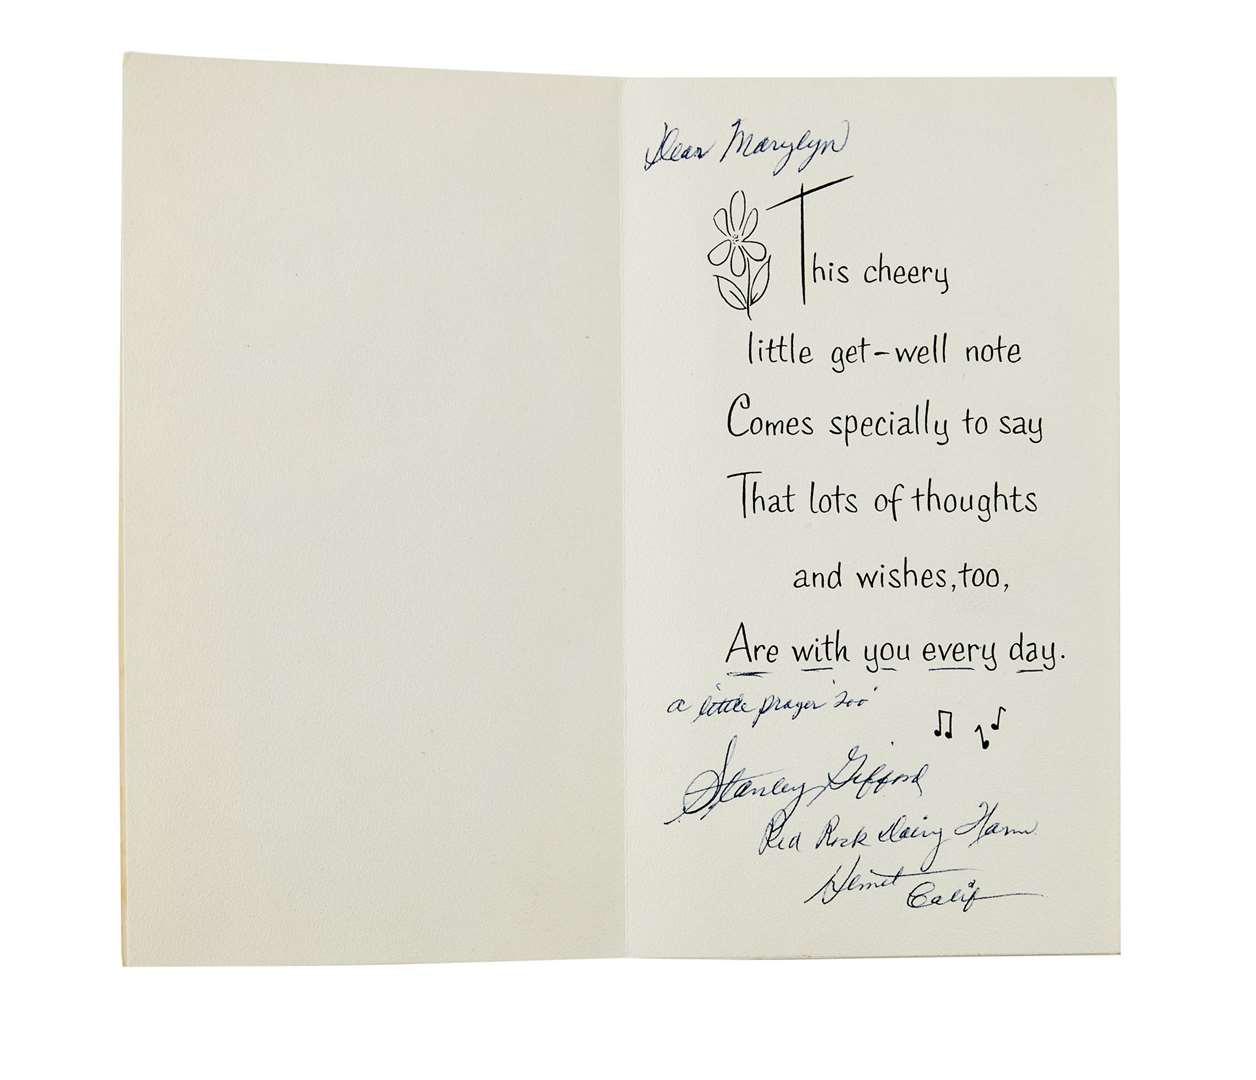 The card comes from Monroe’s personal archive and was sent by her father Stanley Gifford (Julien’s Auctions/PA)